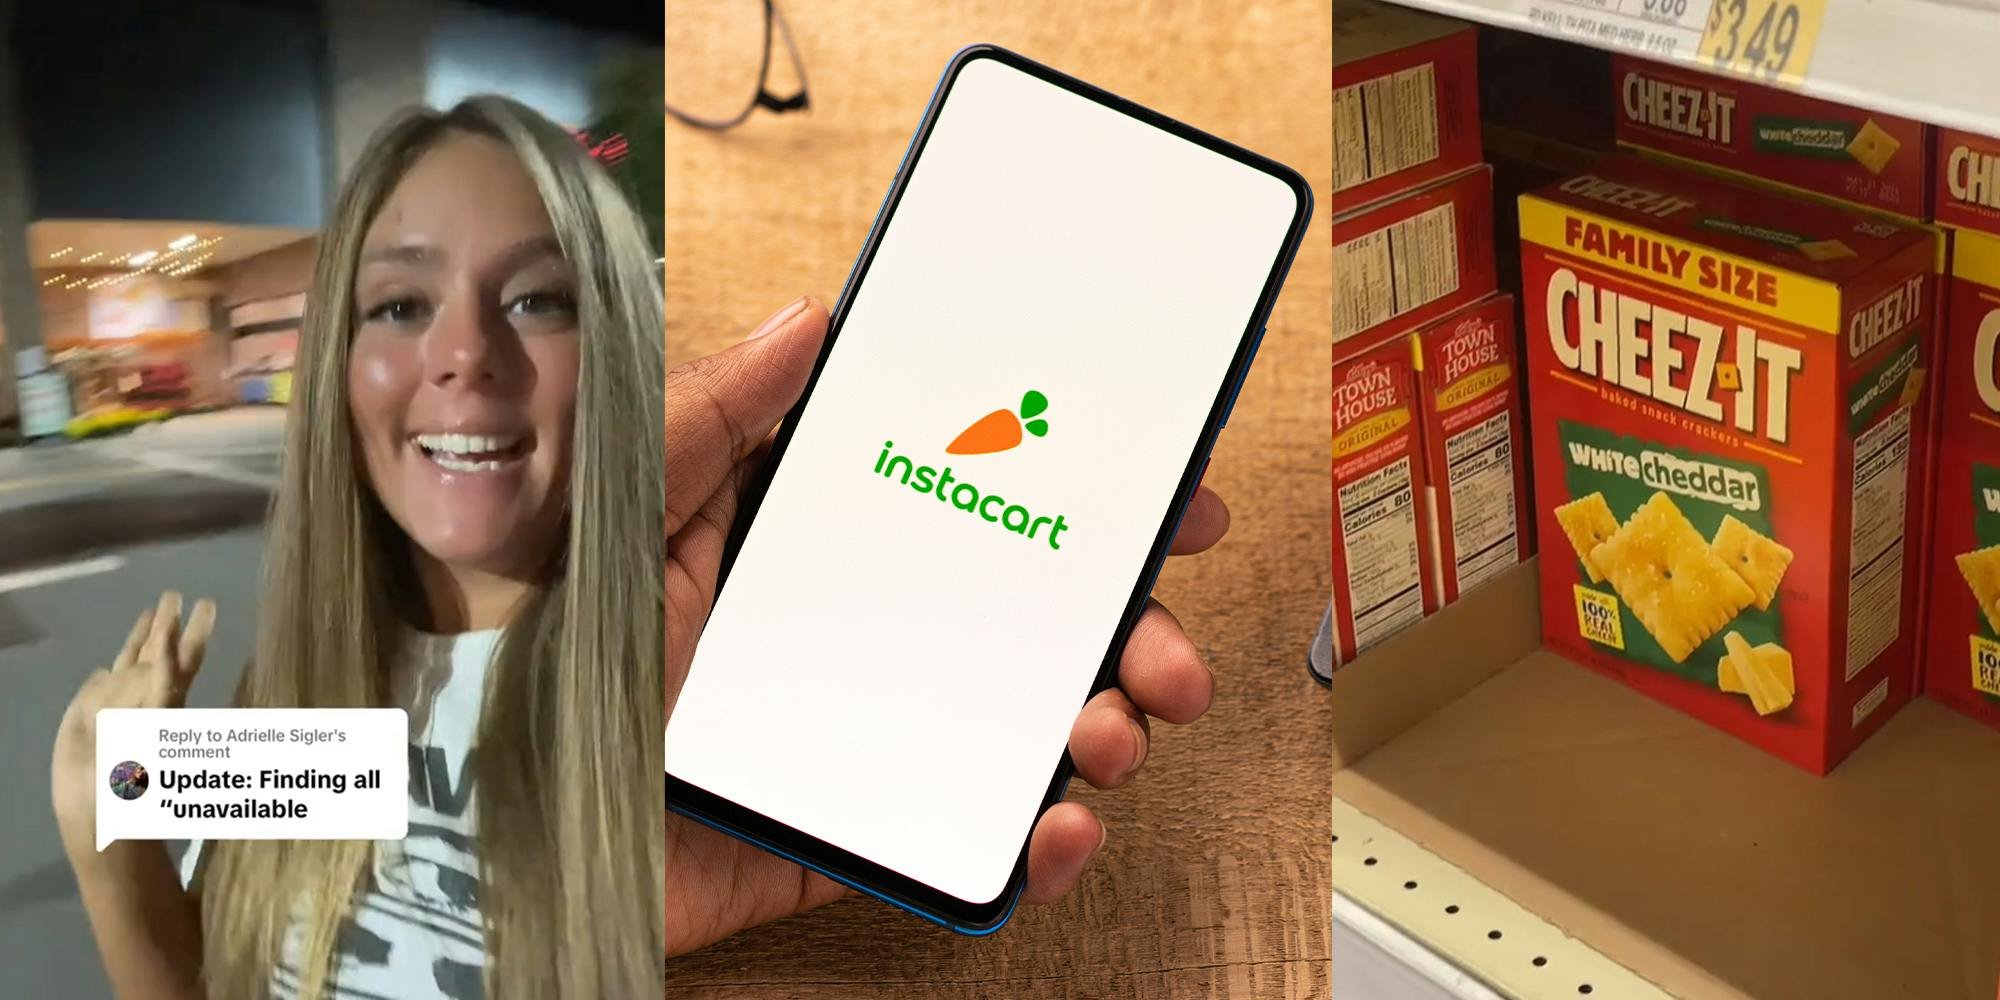 ‘He could not find like 12 of the items’: Woman tries to prove male Instacart shopper wrong by going to grocery store herself